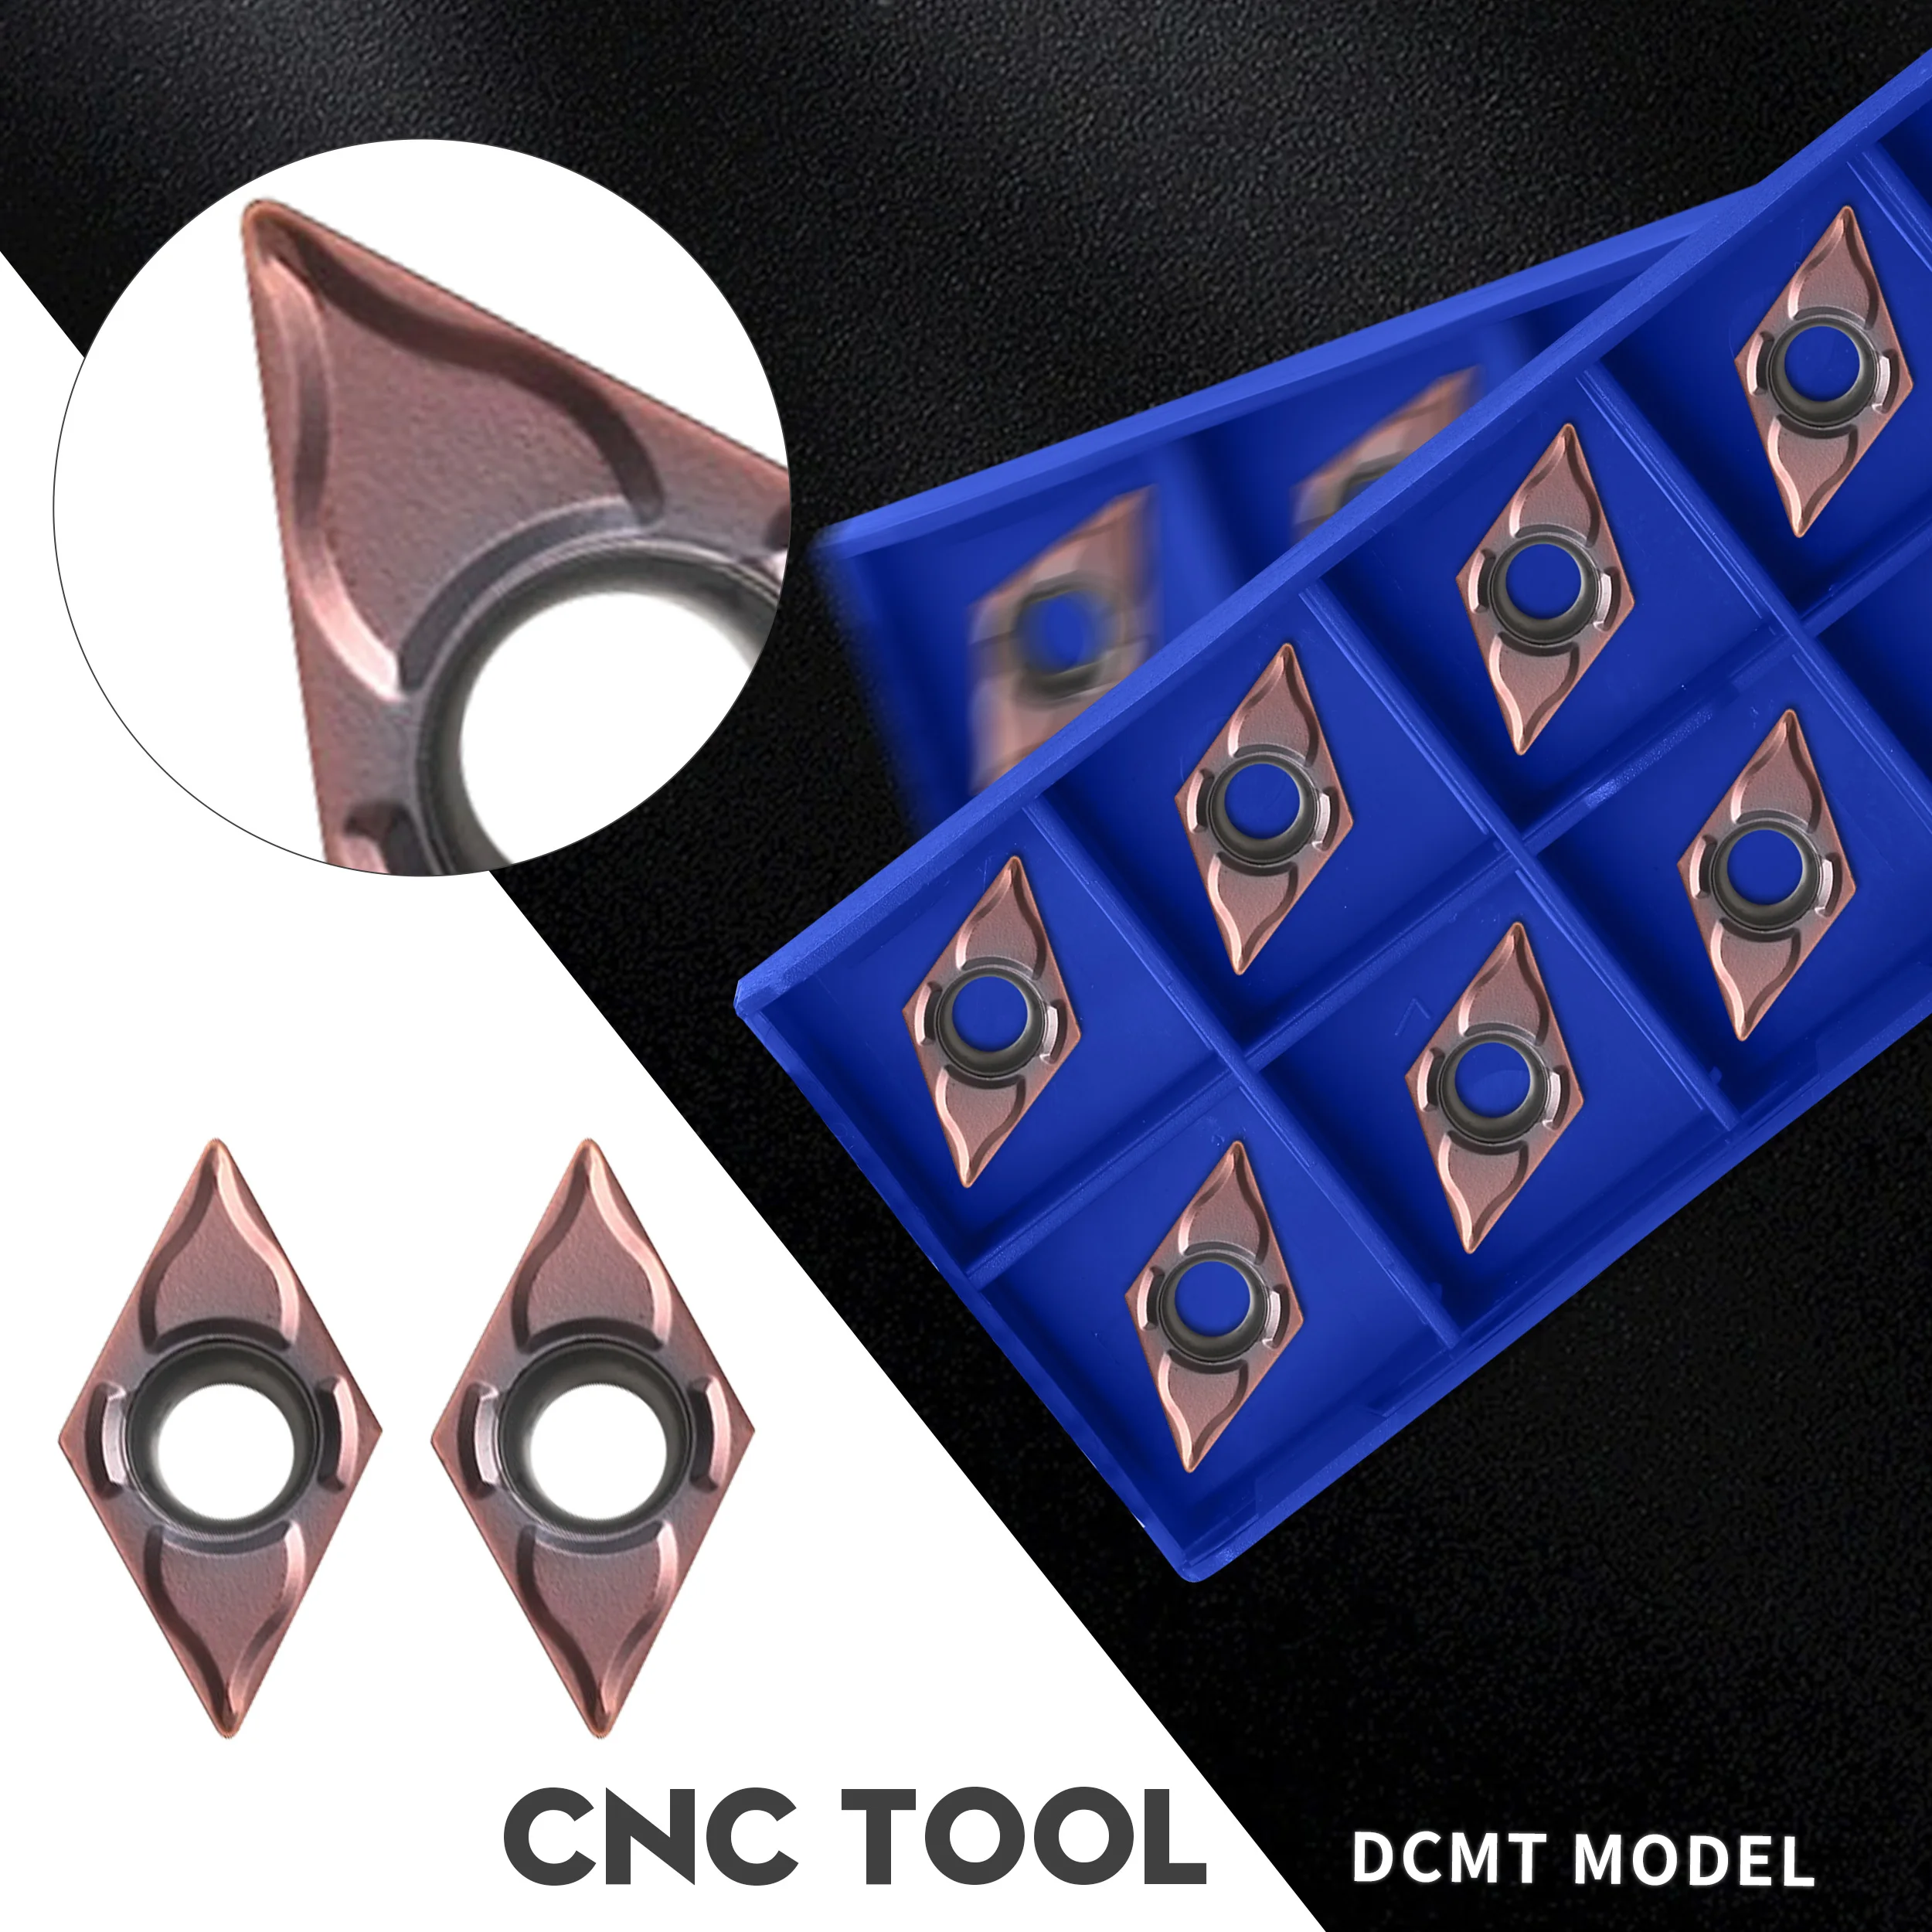 

Carbide Insert DCMT11T302-EF YBG205 DCMT11T304-EF YBG205 DCMT 11T308 EF YBG205 Cutting Blade cutter Stainless Steel Turning Tool